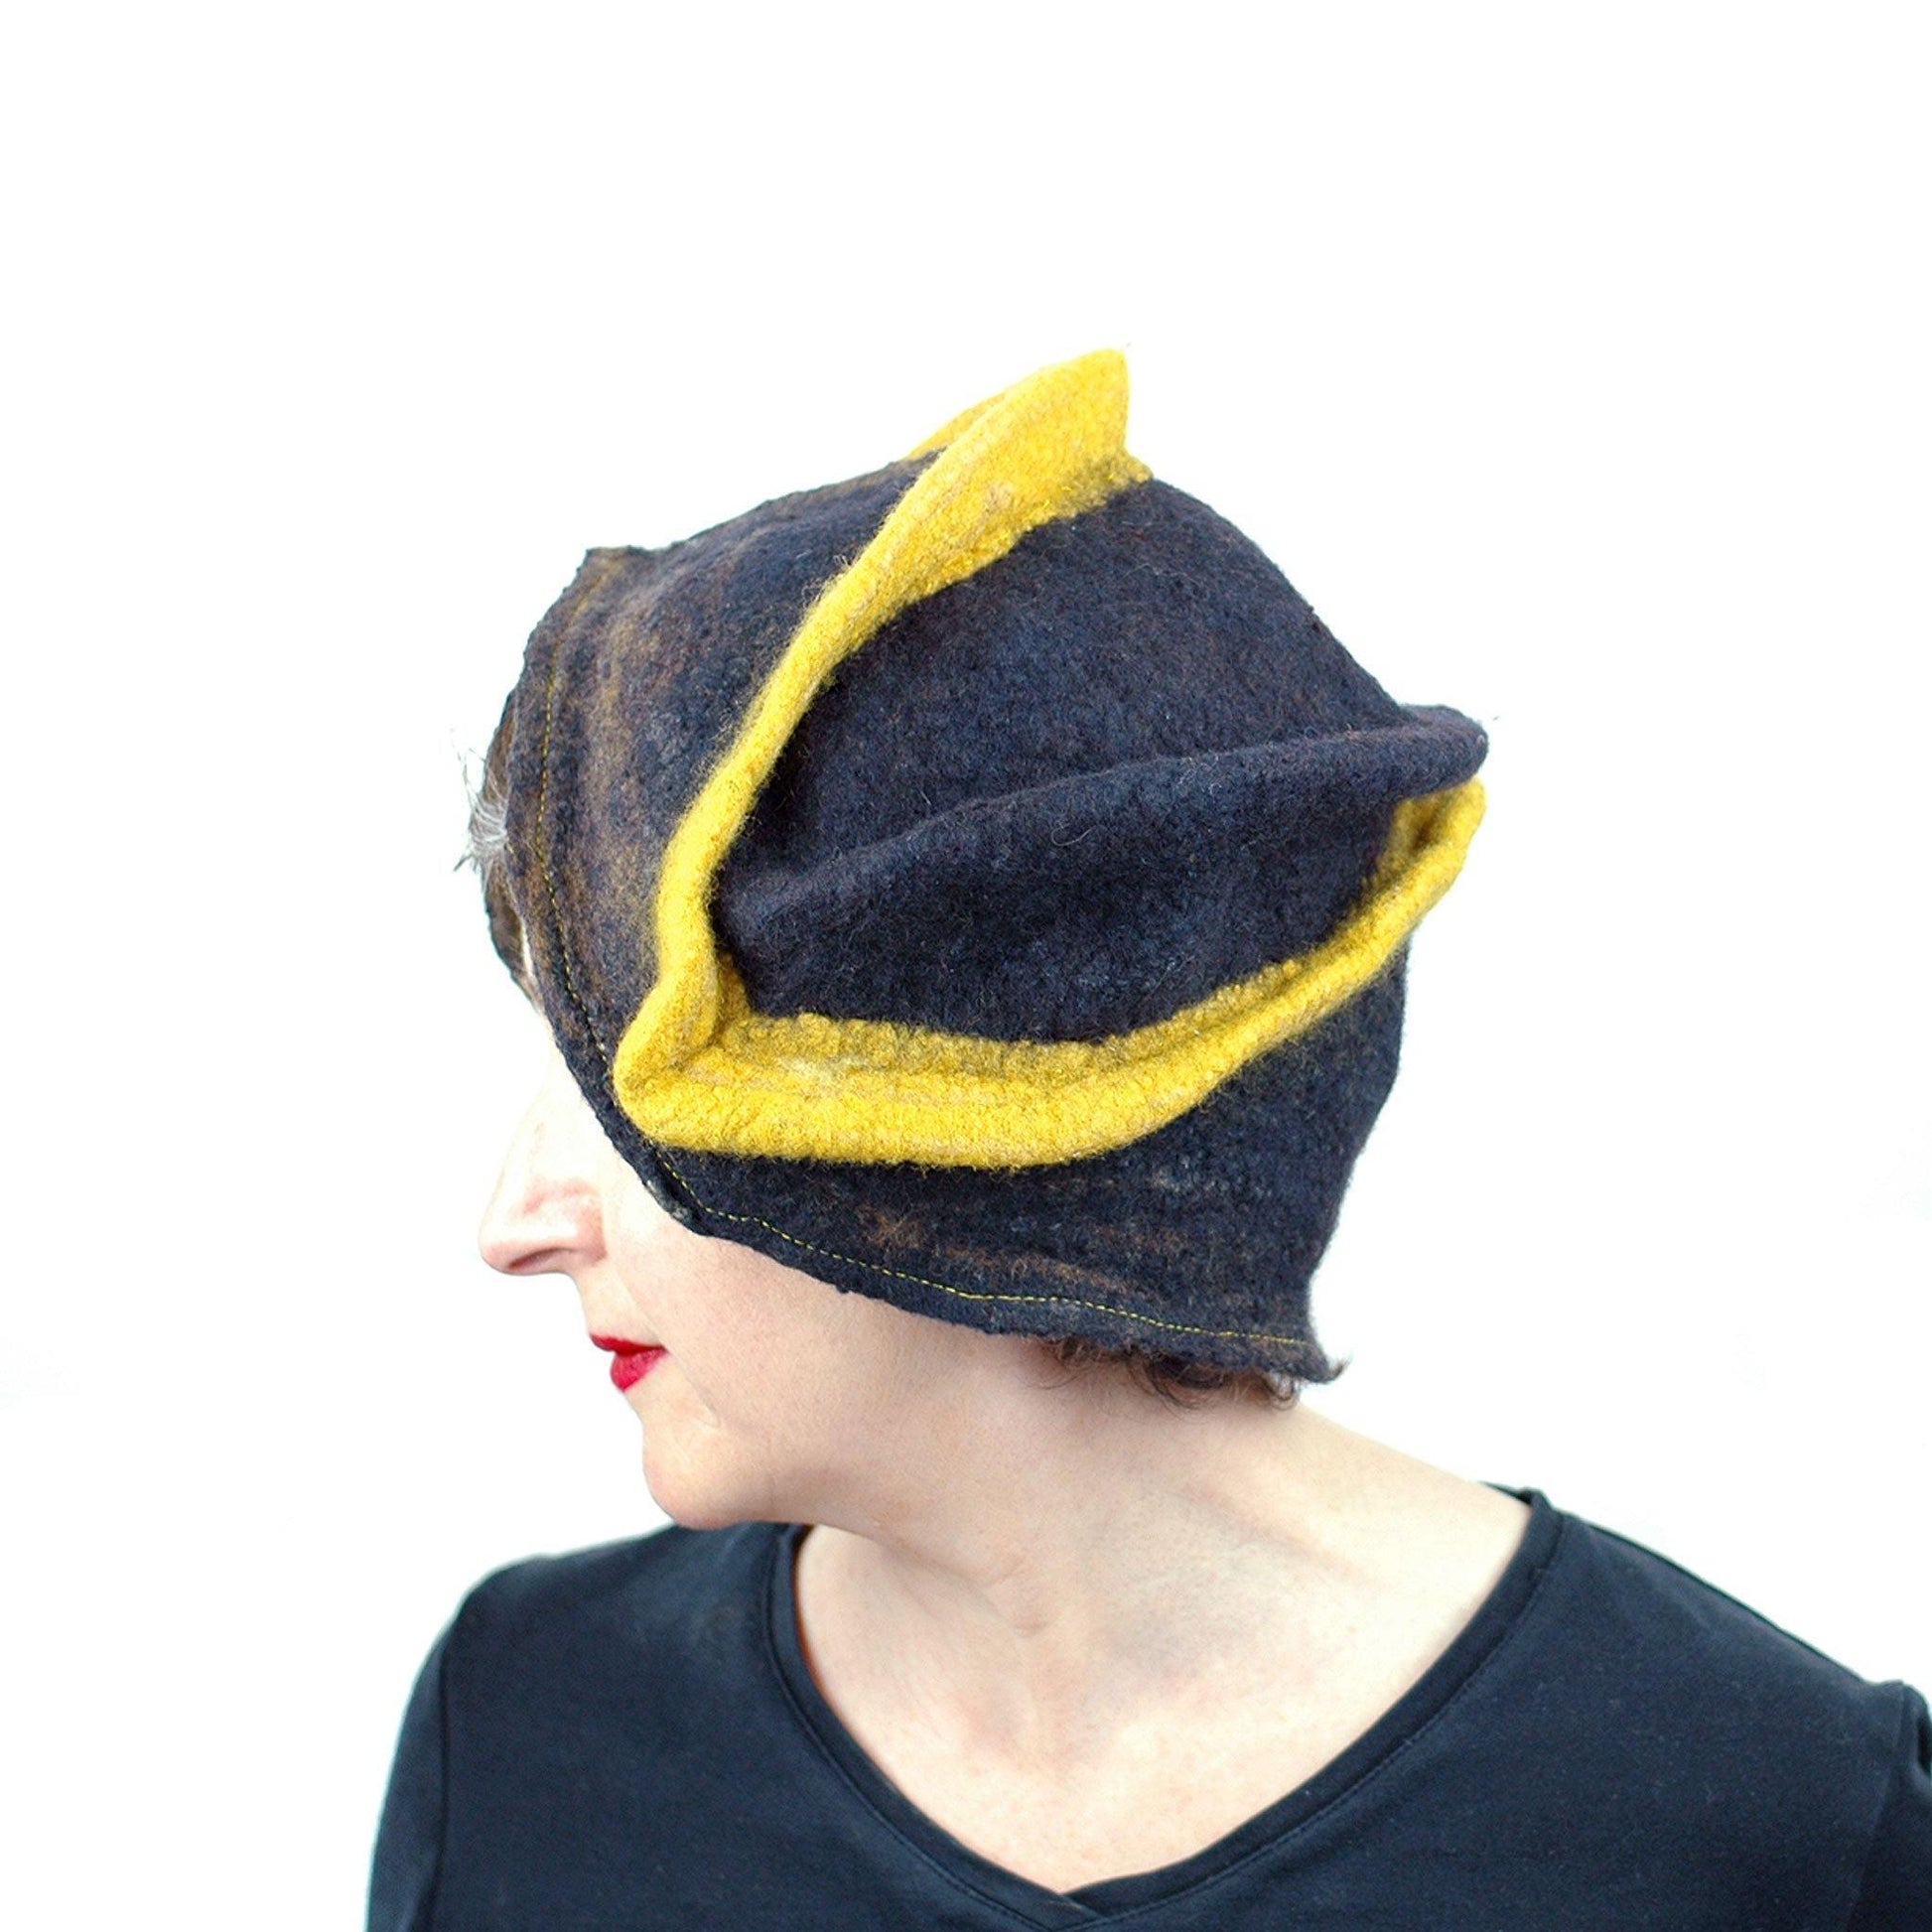 Black and Gold Wizard Hat for Pittsburgh or Hufflepuff Fans - side view